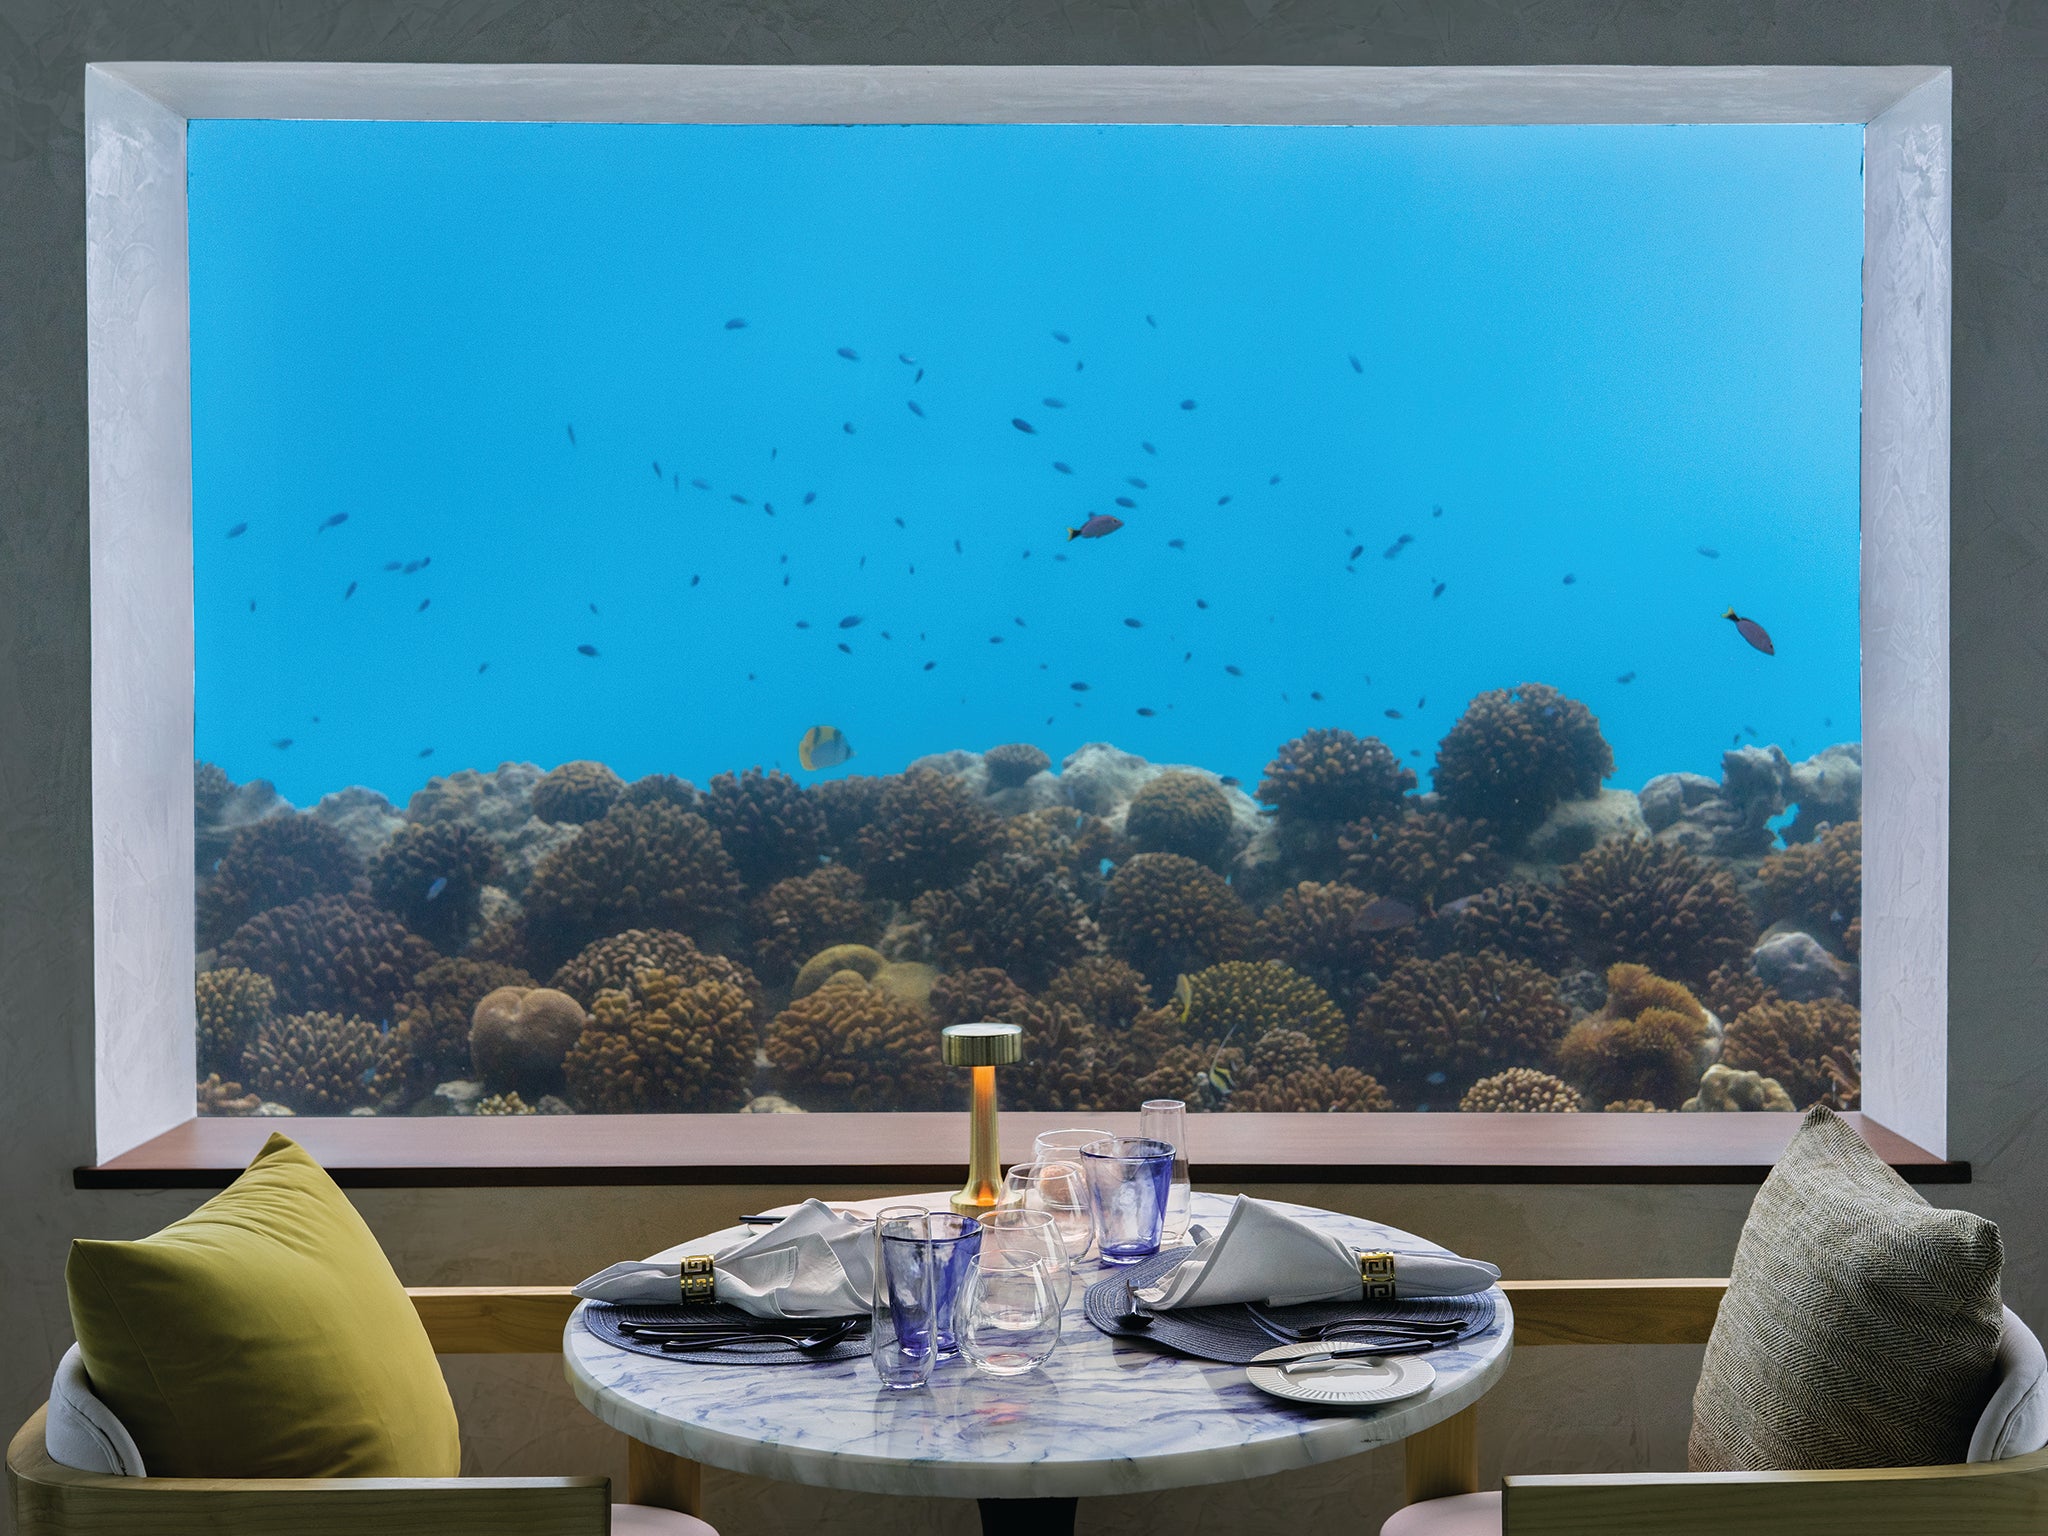 The resort’s underwater restaurant is the perfect place for shark spotting